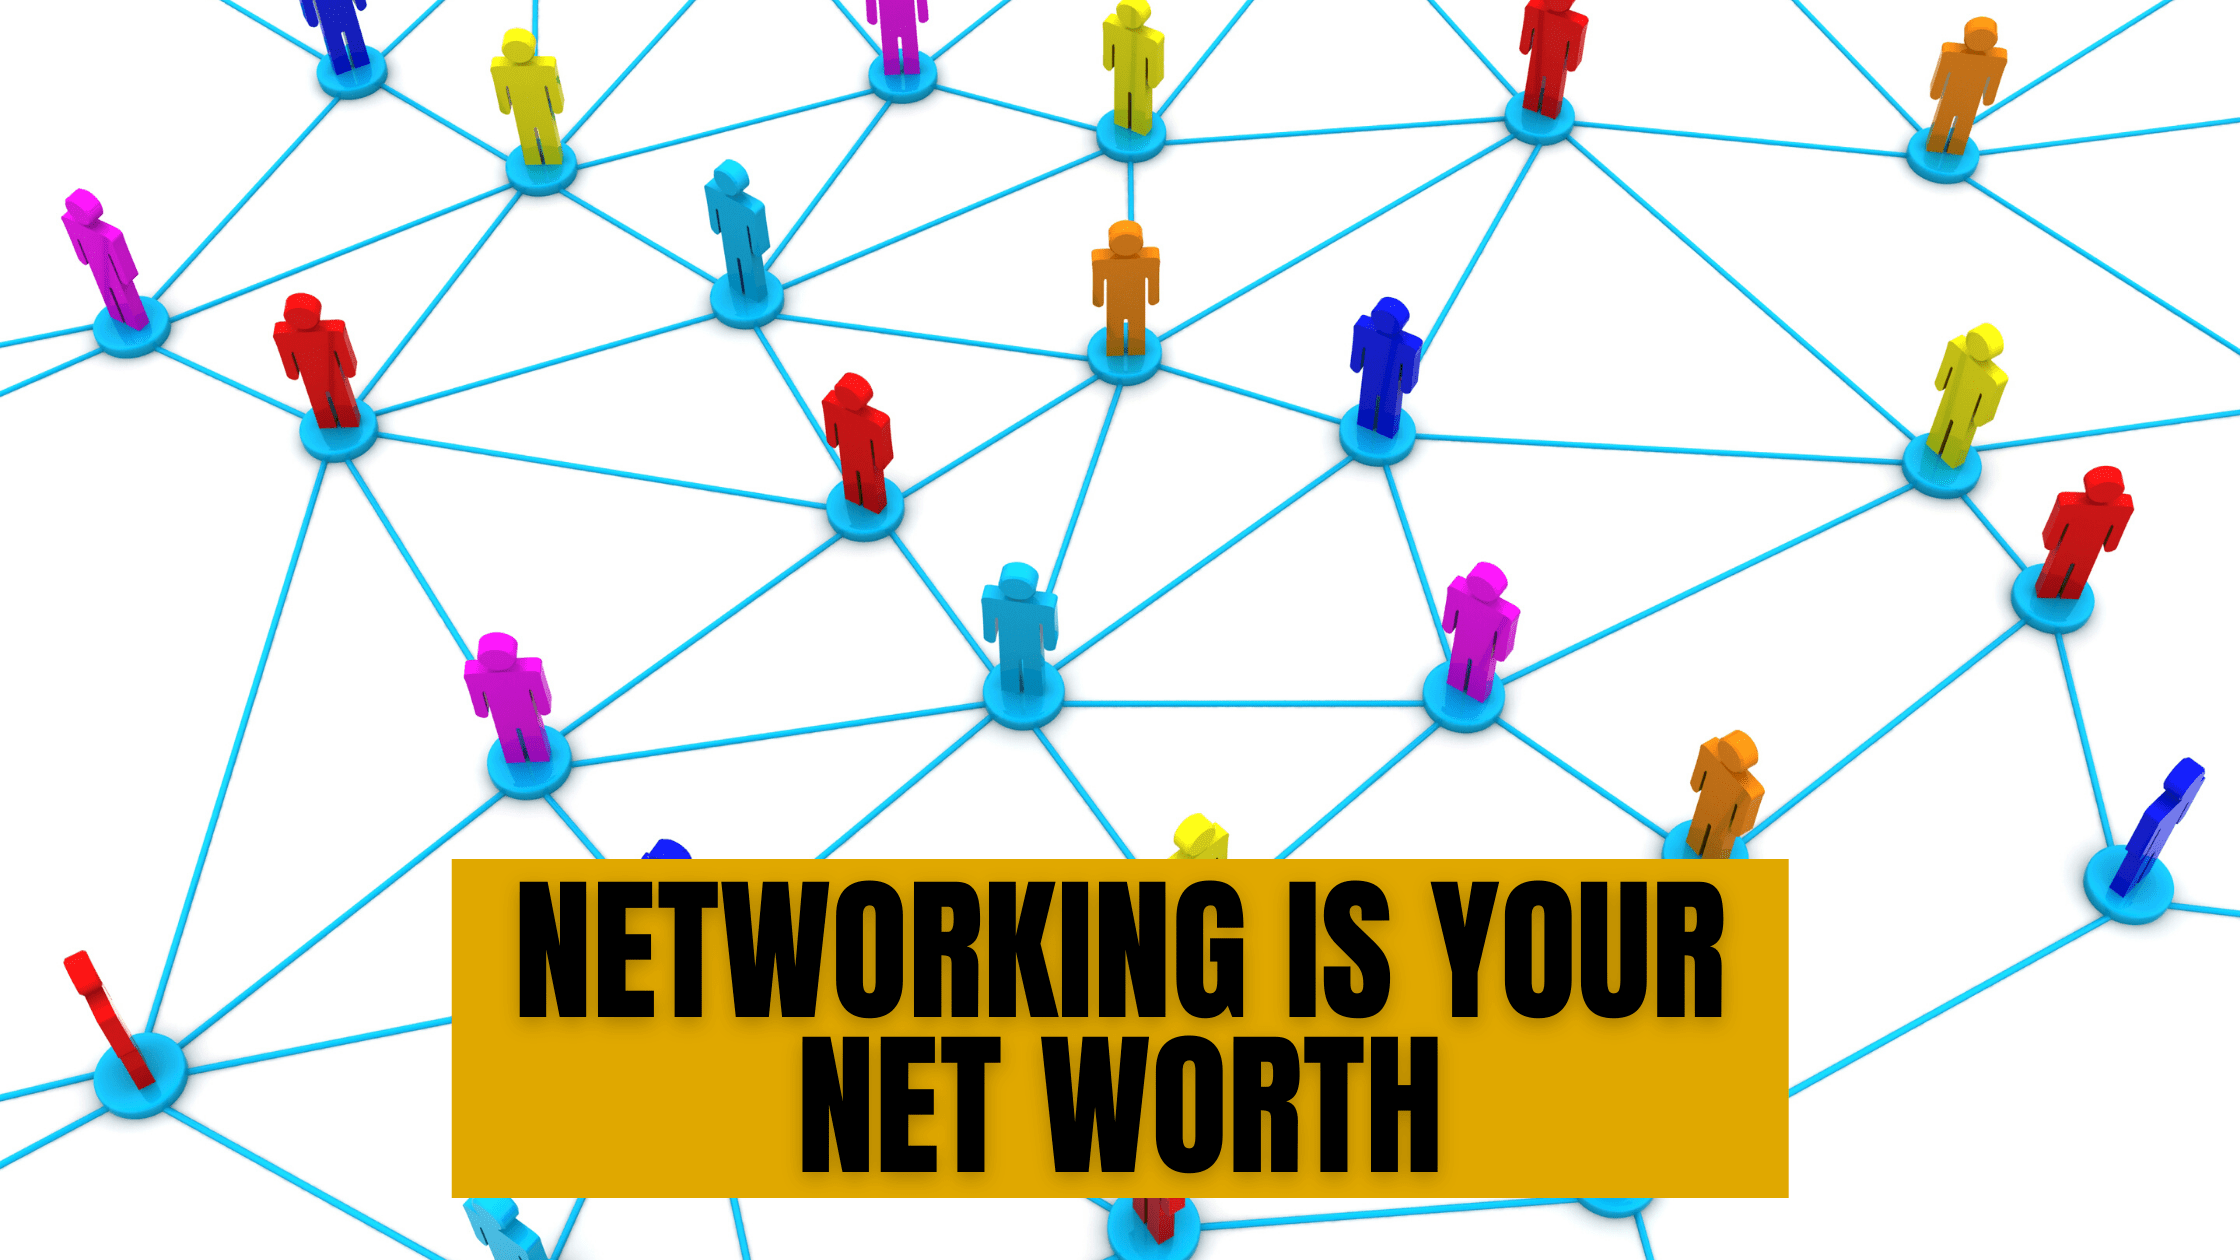 NETWORKING IS YOUR NET WORTH